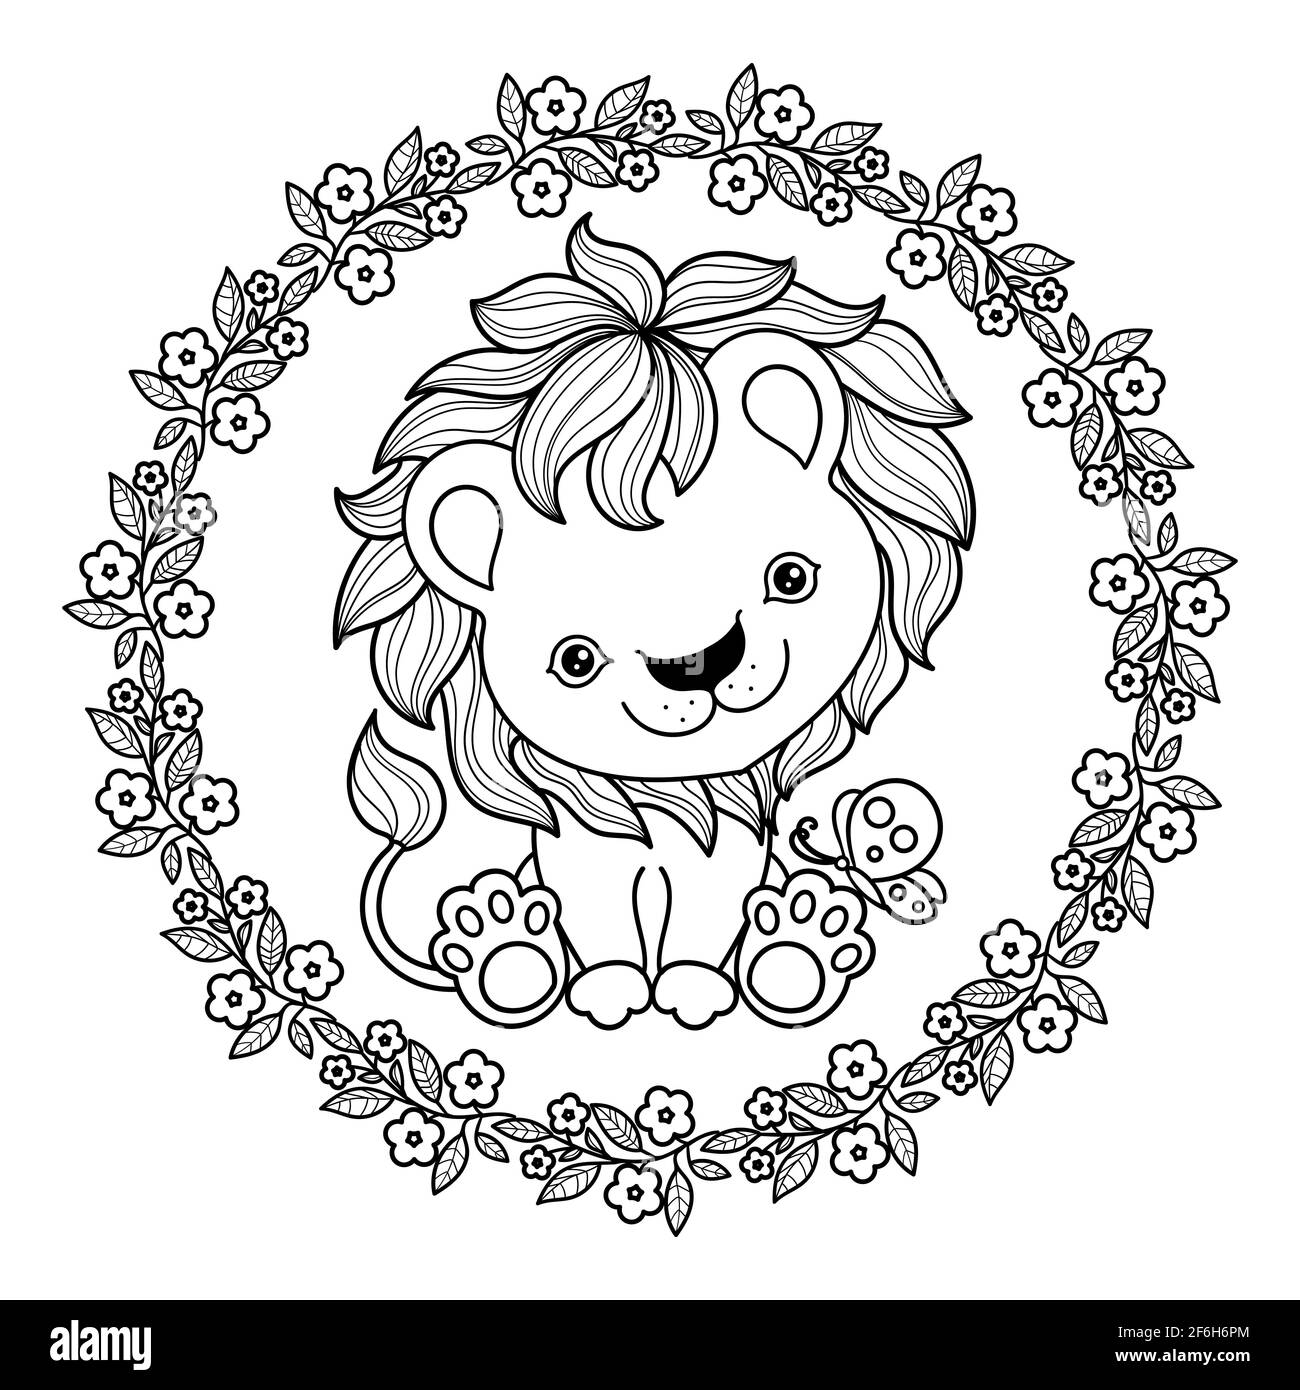 Cute cartoon lion cub in a round frame of flowers. Linear drawing. Vector Stock Vector